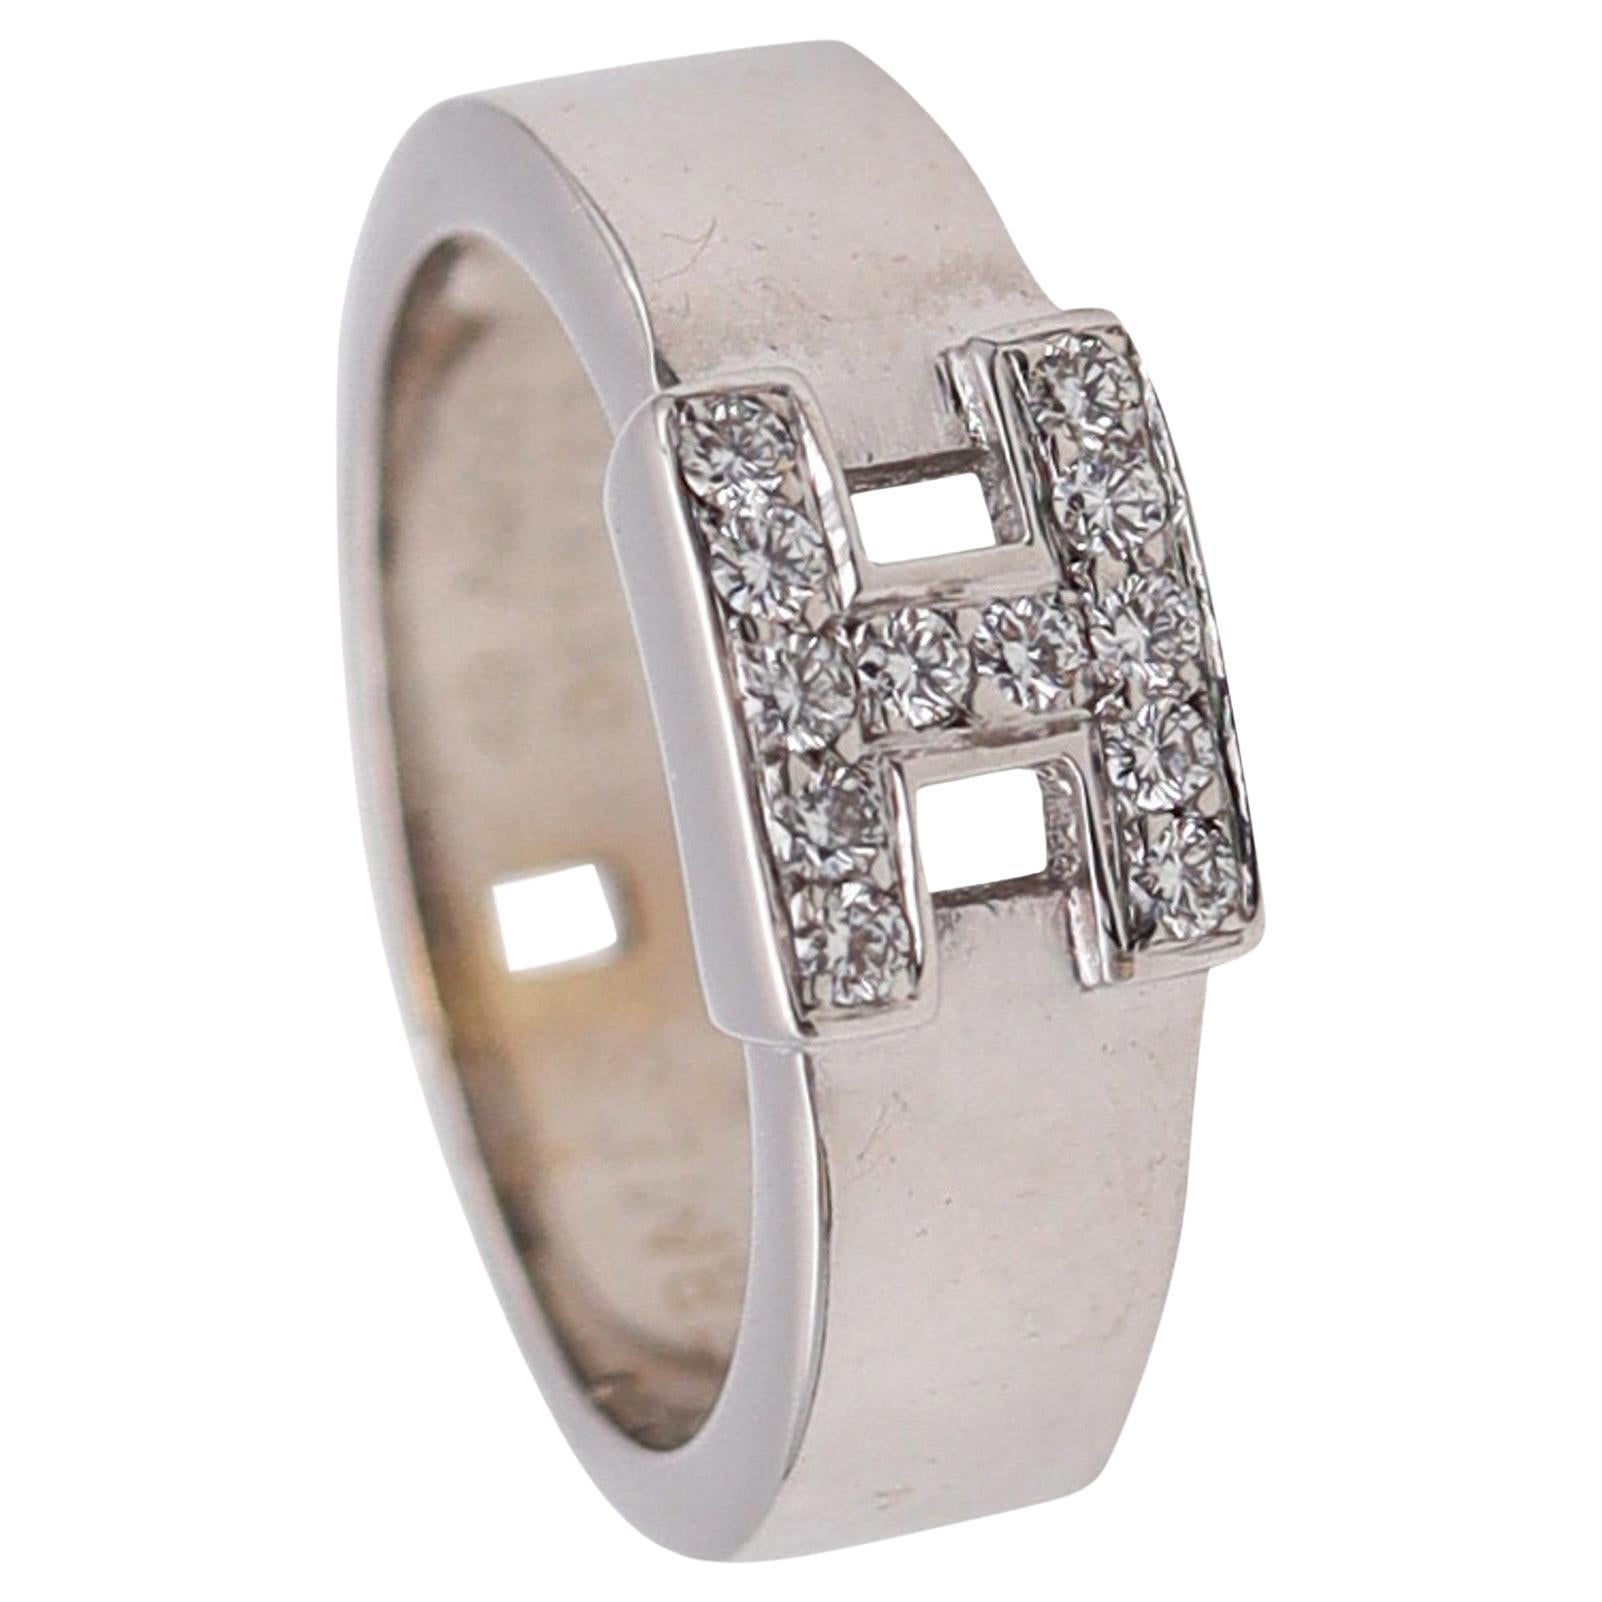 Hermes Paris H Ring Band In 18Kt White Gold With VVS Round Diamonds